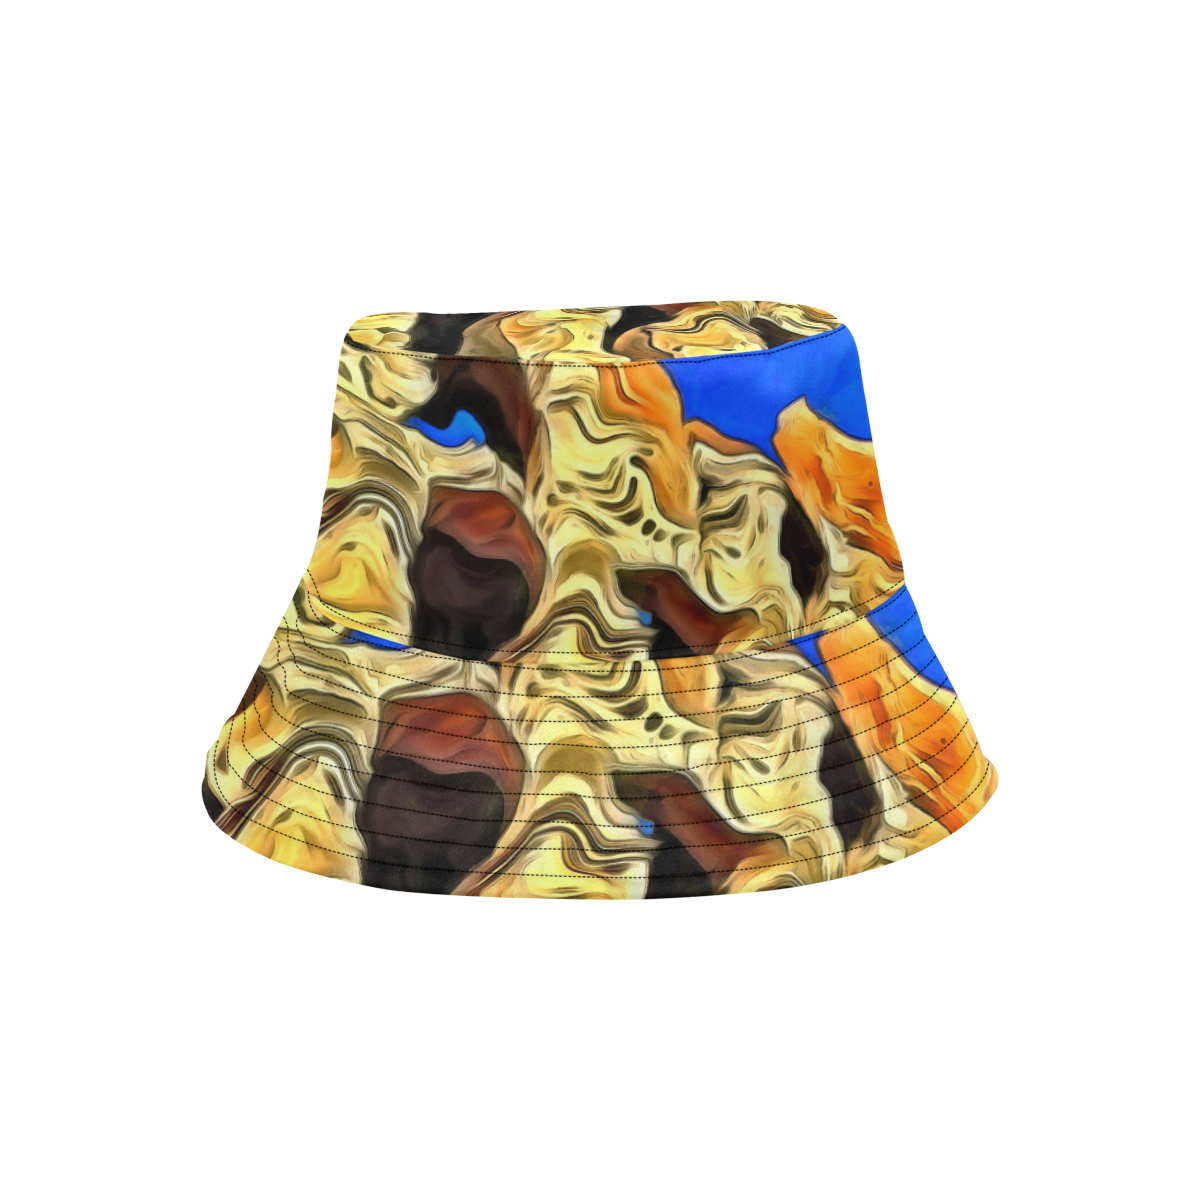 Colosseum Rome Italy Sunny Day KPA All Over Print Bucket Hat